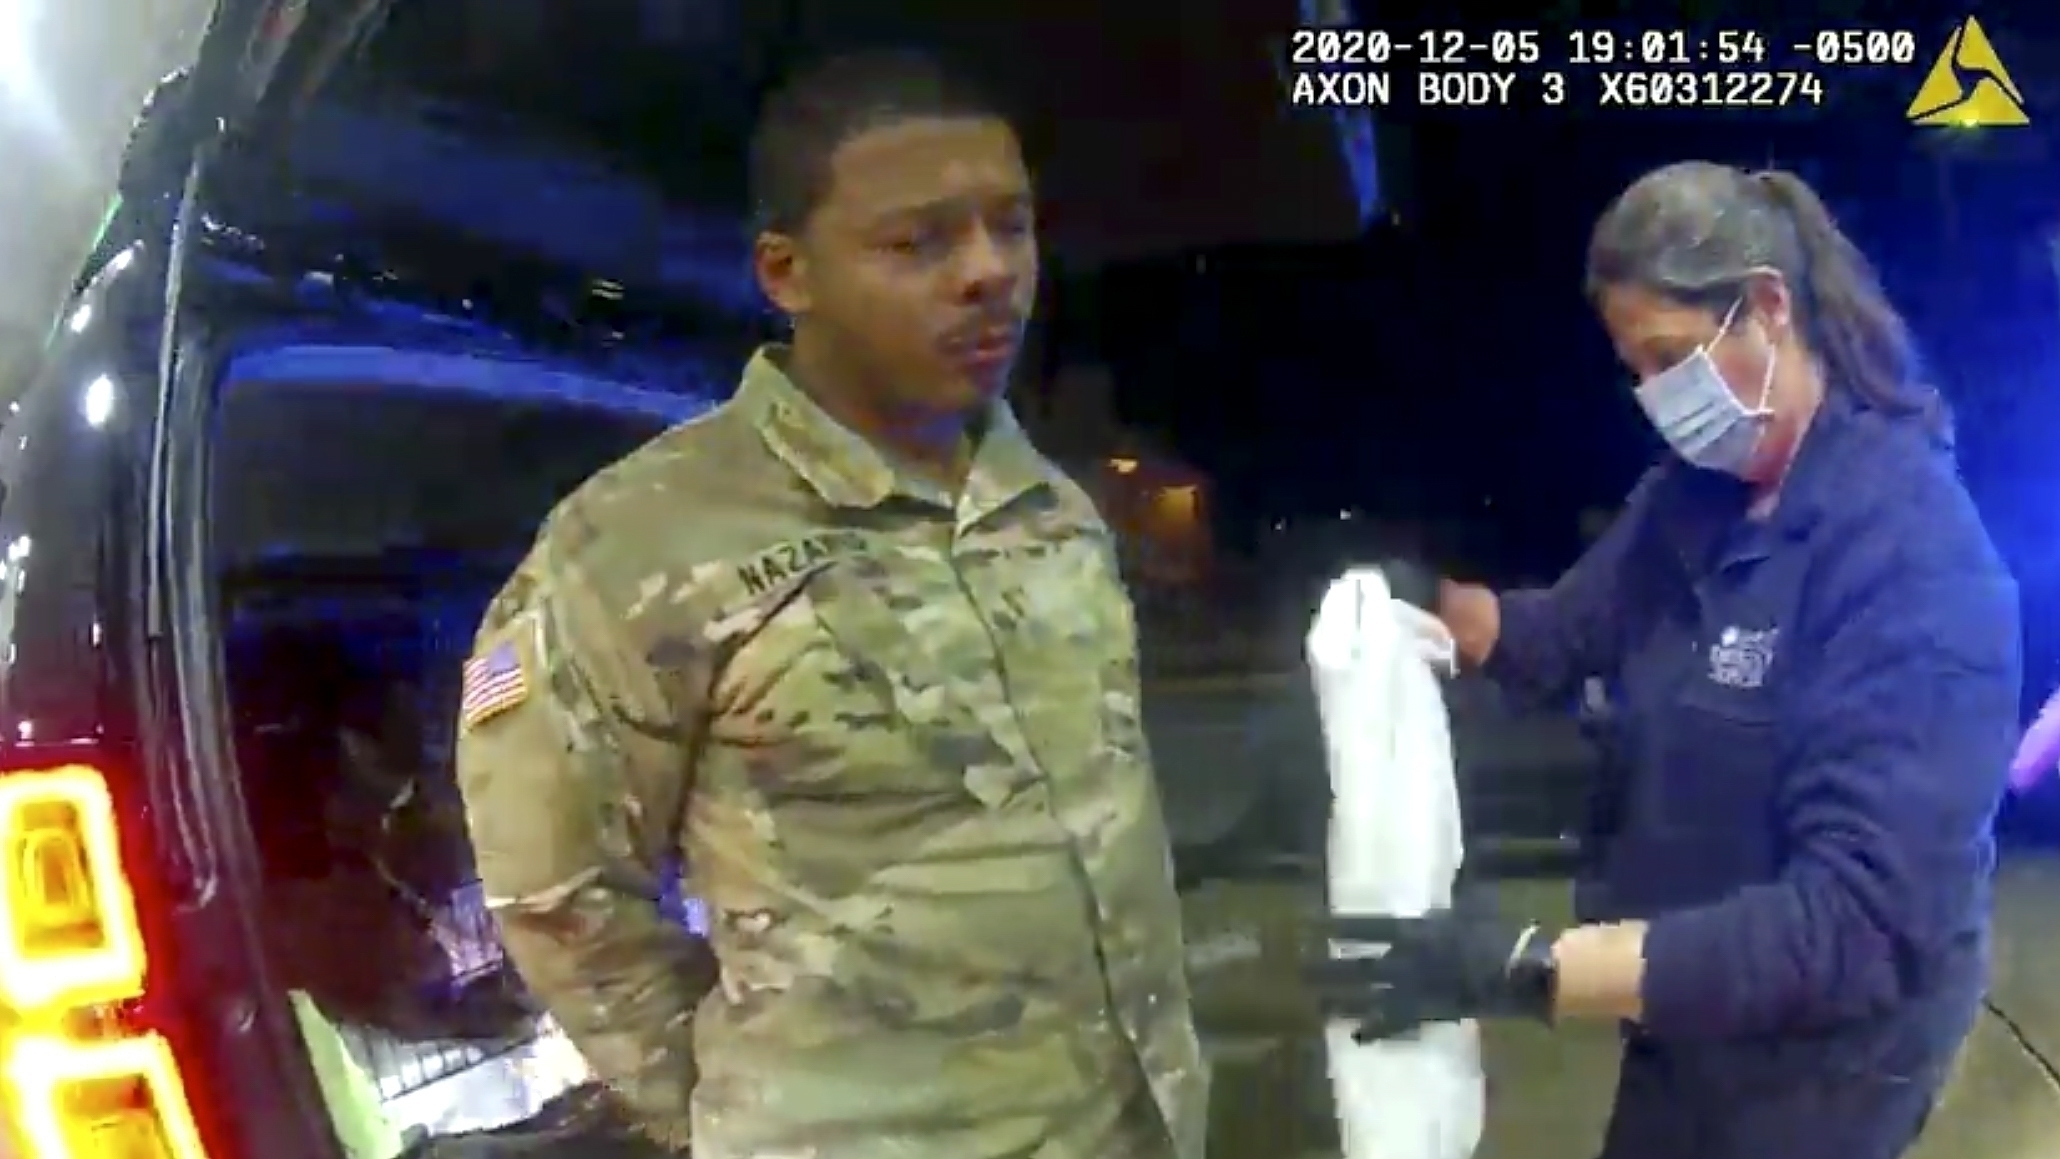 FILE - In this image taken from Windsor, Va., Police body camera footage, U.S. Army Lt. Caron Nazar...